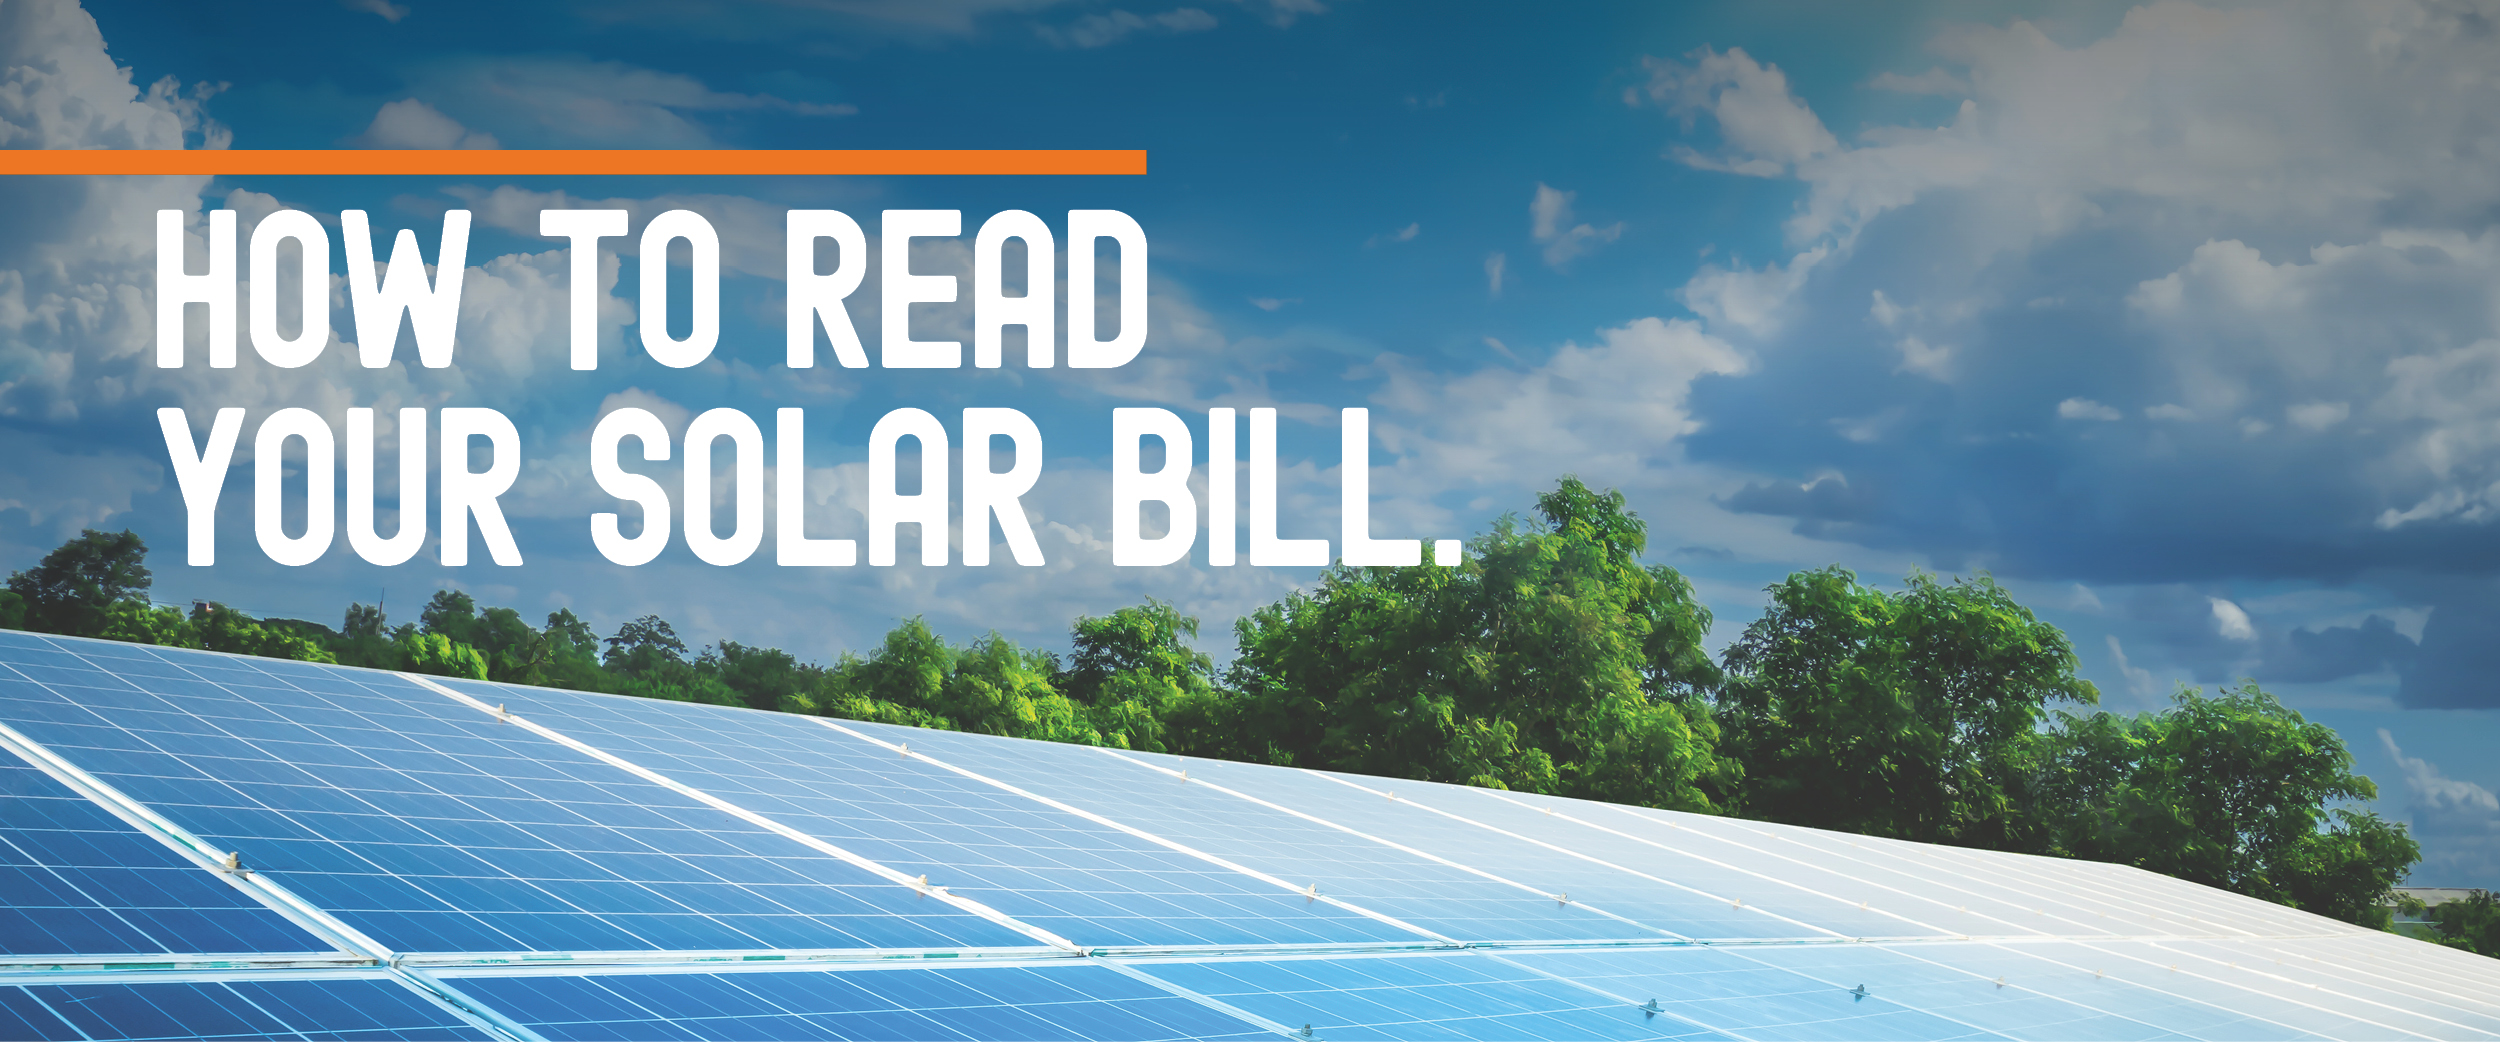 how-to-read-your-solar-bill-black-hills-energy